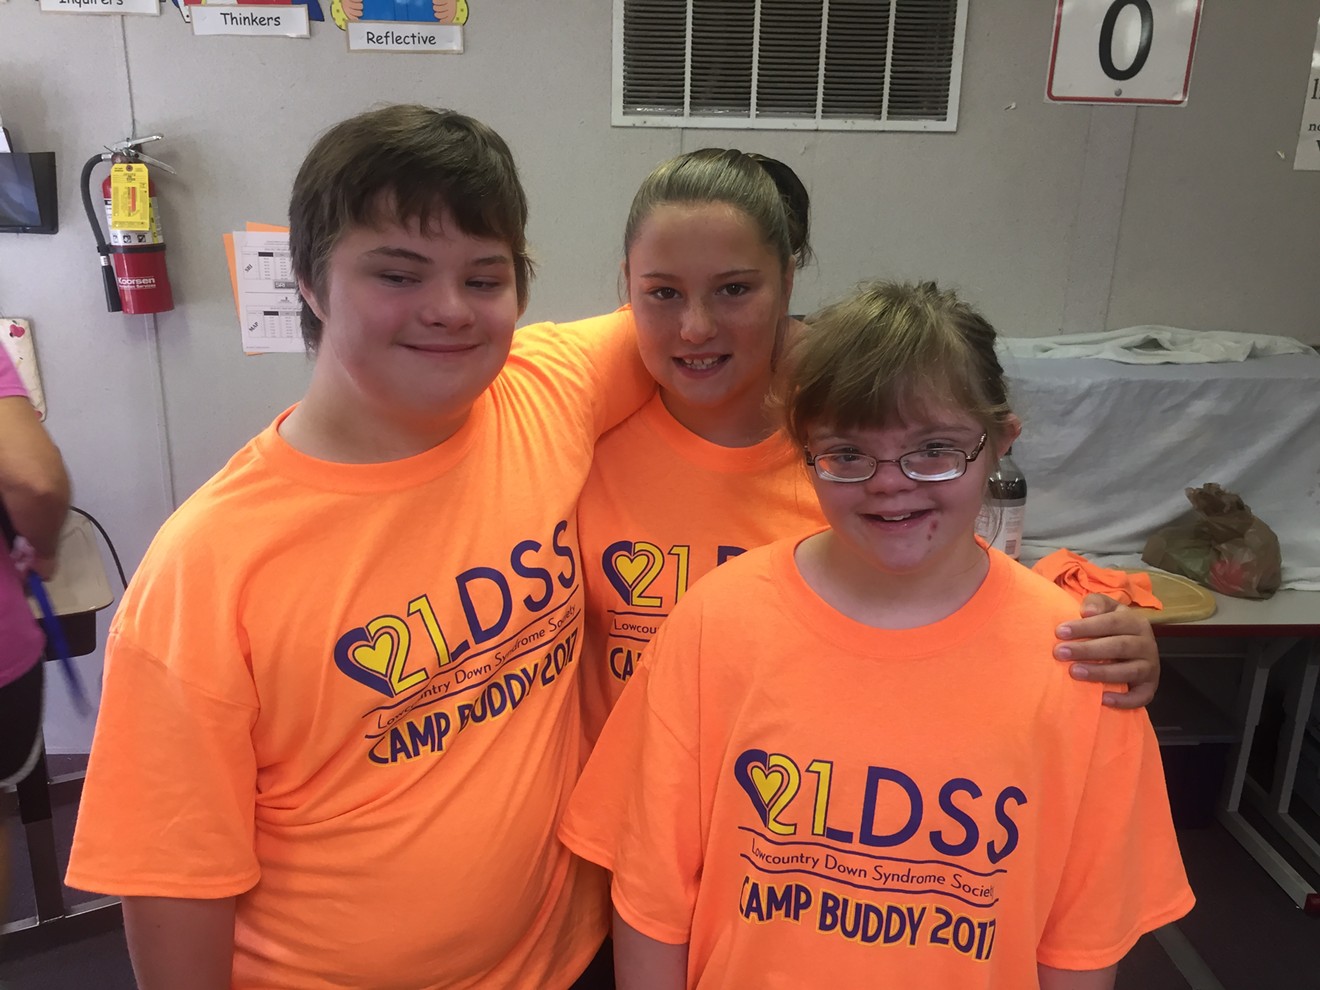 chatham_camp_buddy_lowcountry_down_syndrome_society_2017_10.jpg